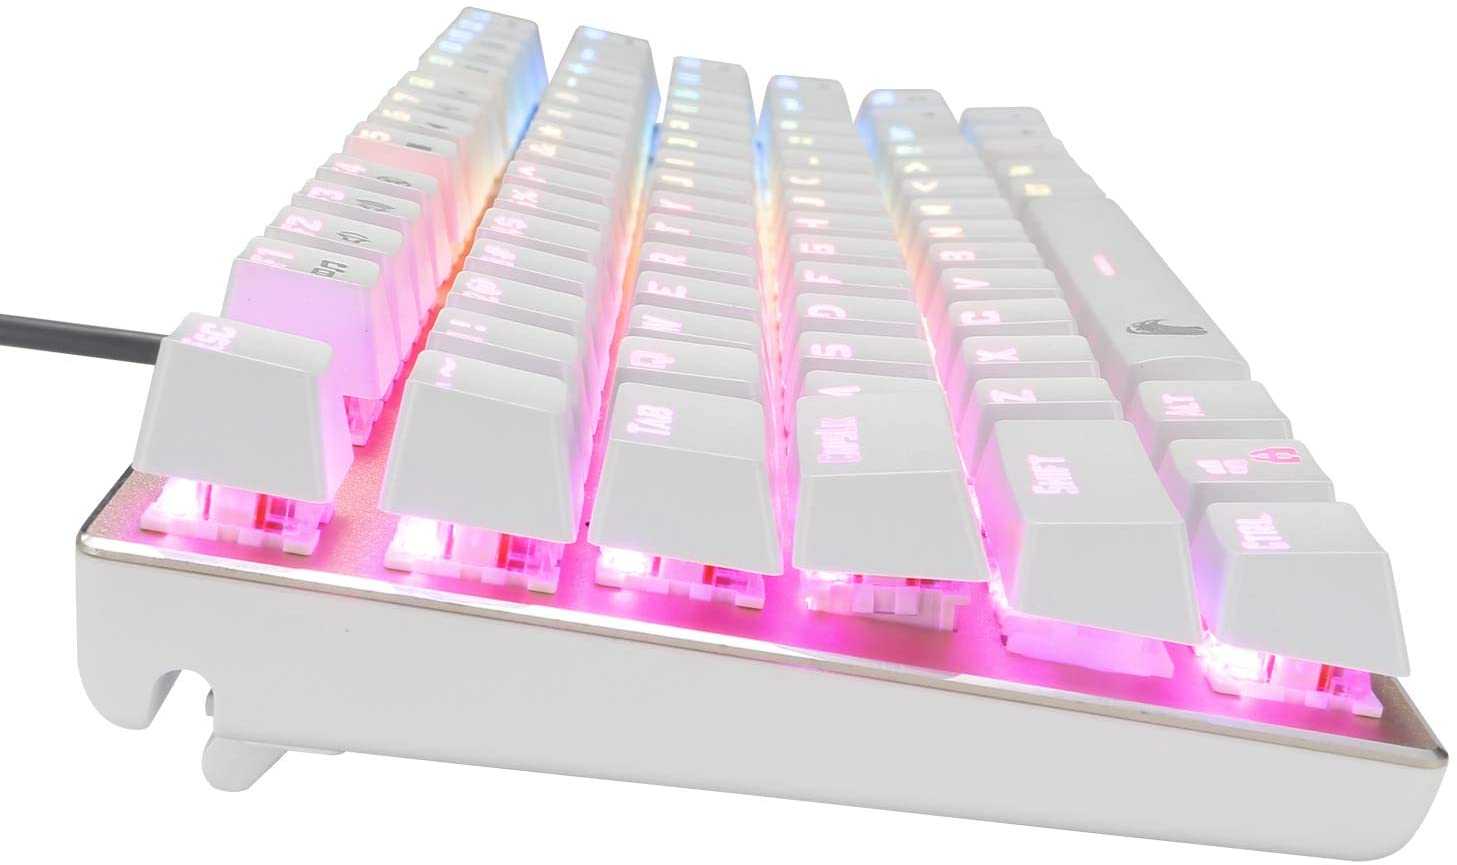 Z-88 RGB Mechanical Gaming Keyboard, Blue Switches - Clicky, USB Wired 60% Compact 81 Keys Hot Swappable for Mac, PC, Gold and White.